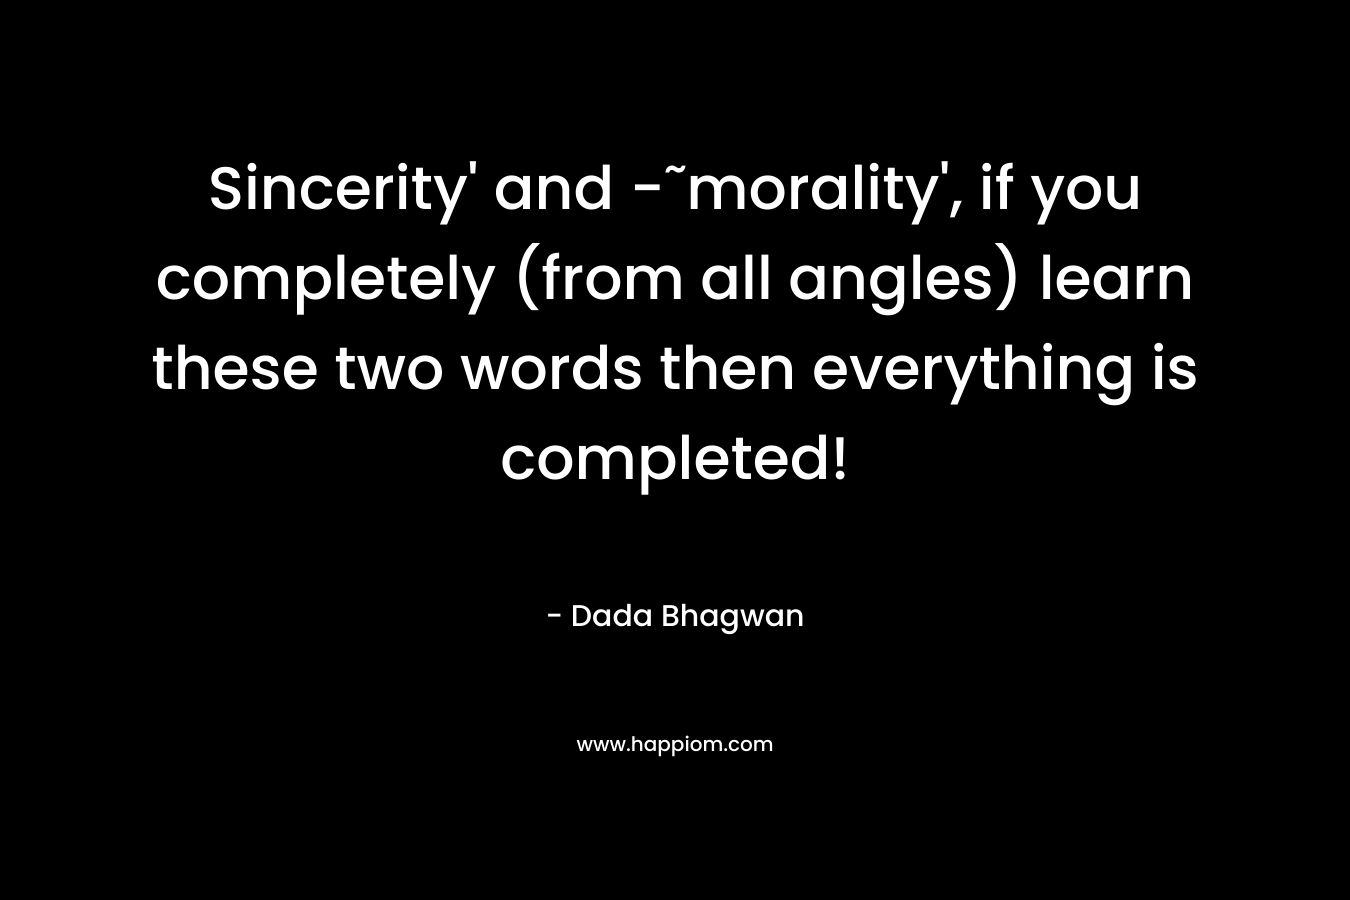 Sincerity’ and -˜morality’, if you completely (from all angles) learn these two words then everything is completed! – Dada Bhagwan